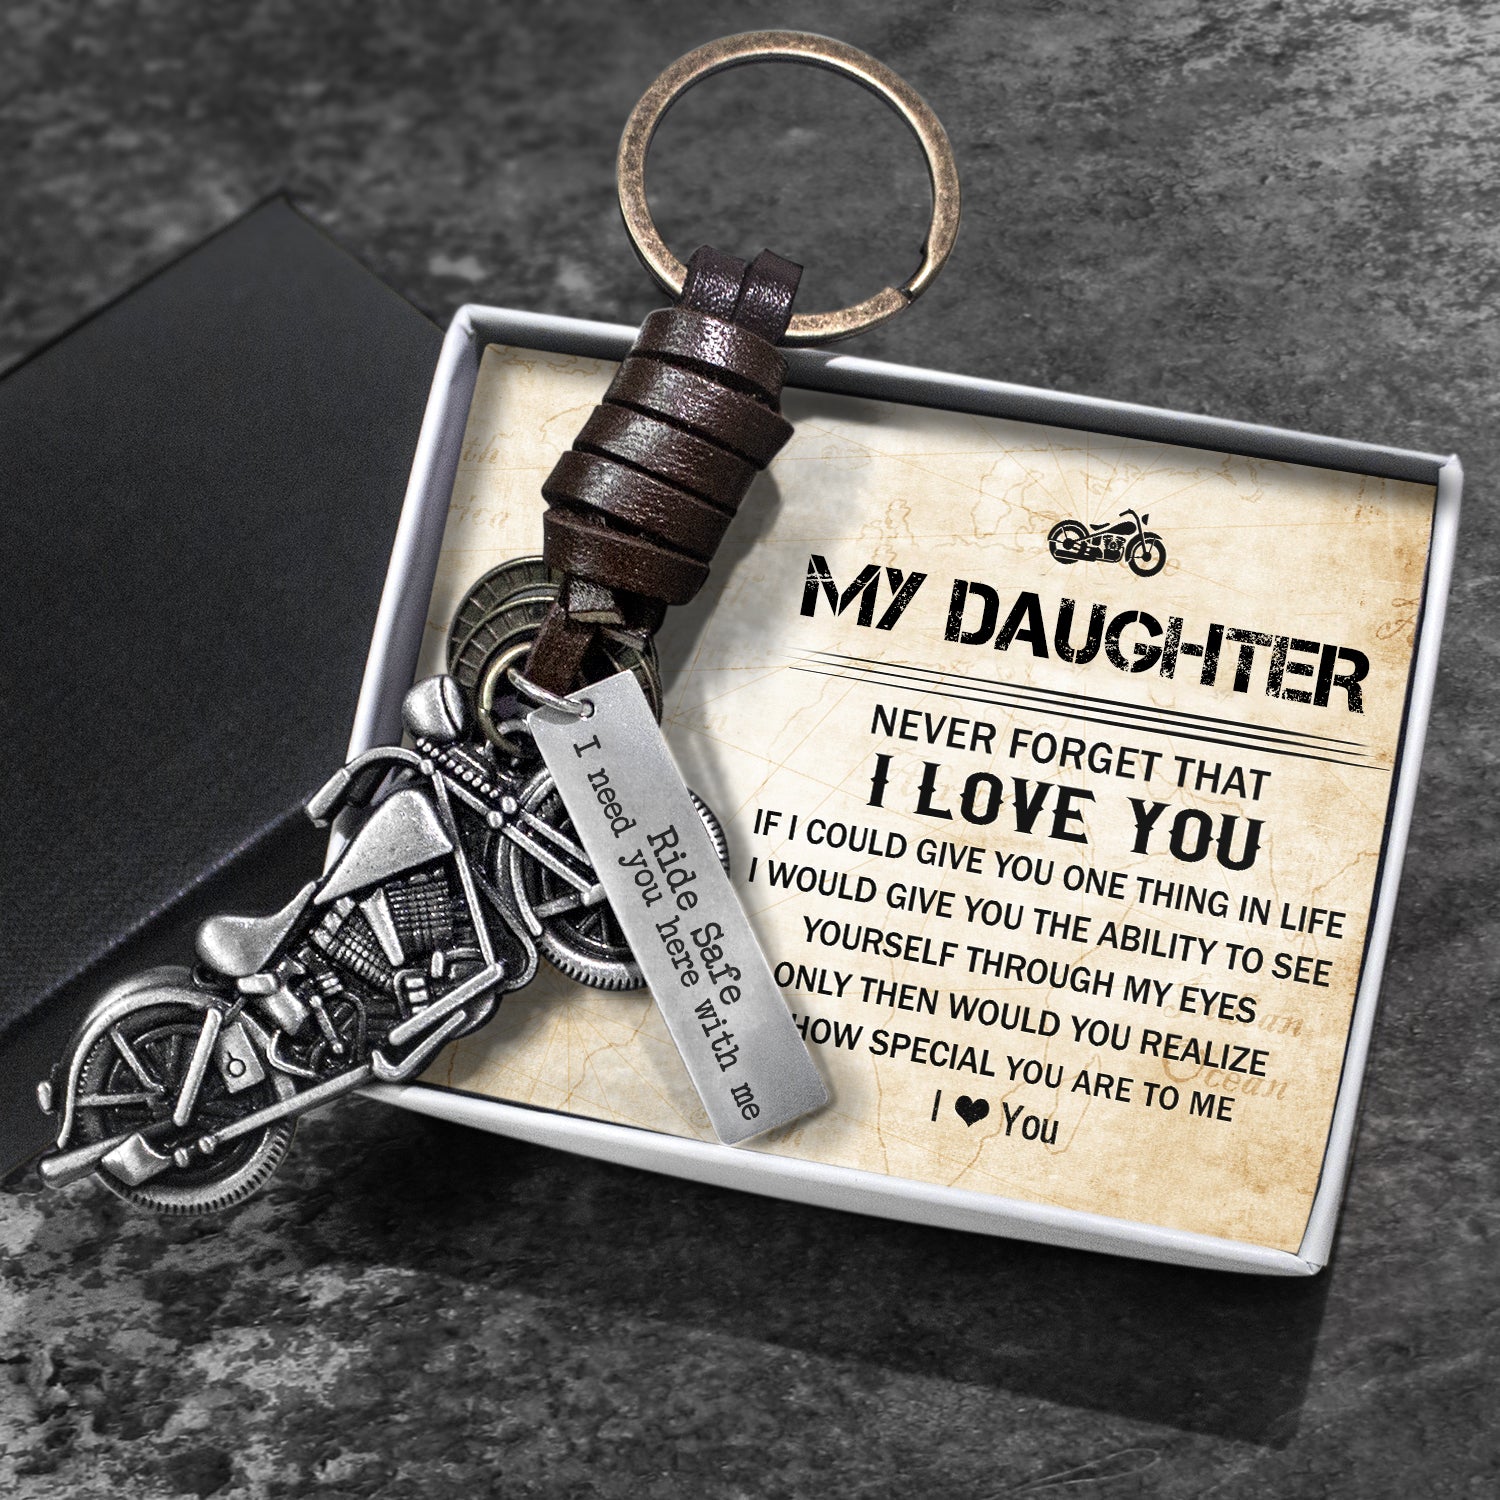 Motorcycle Keychain - Biker - To My Daughter - Ride Safe, I Need You Here With Me